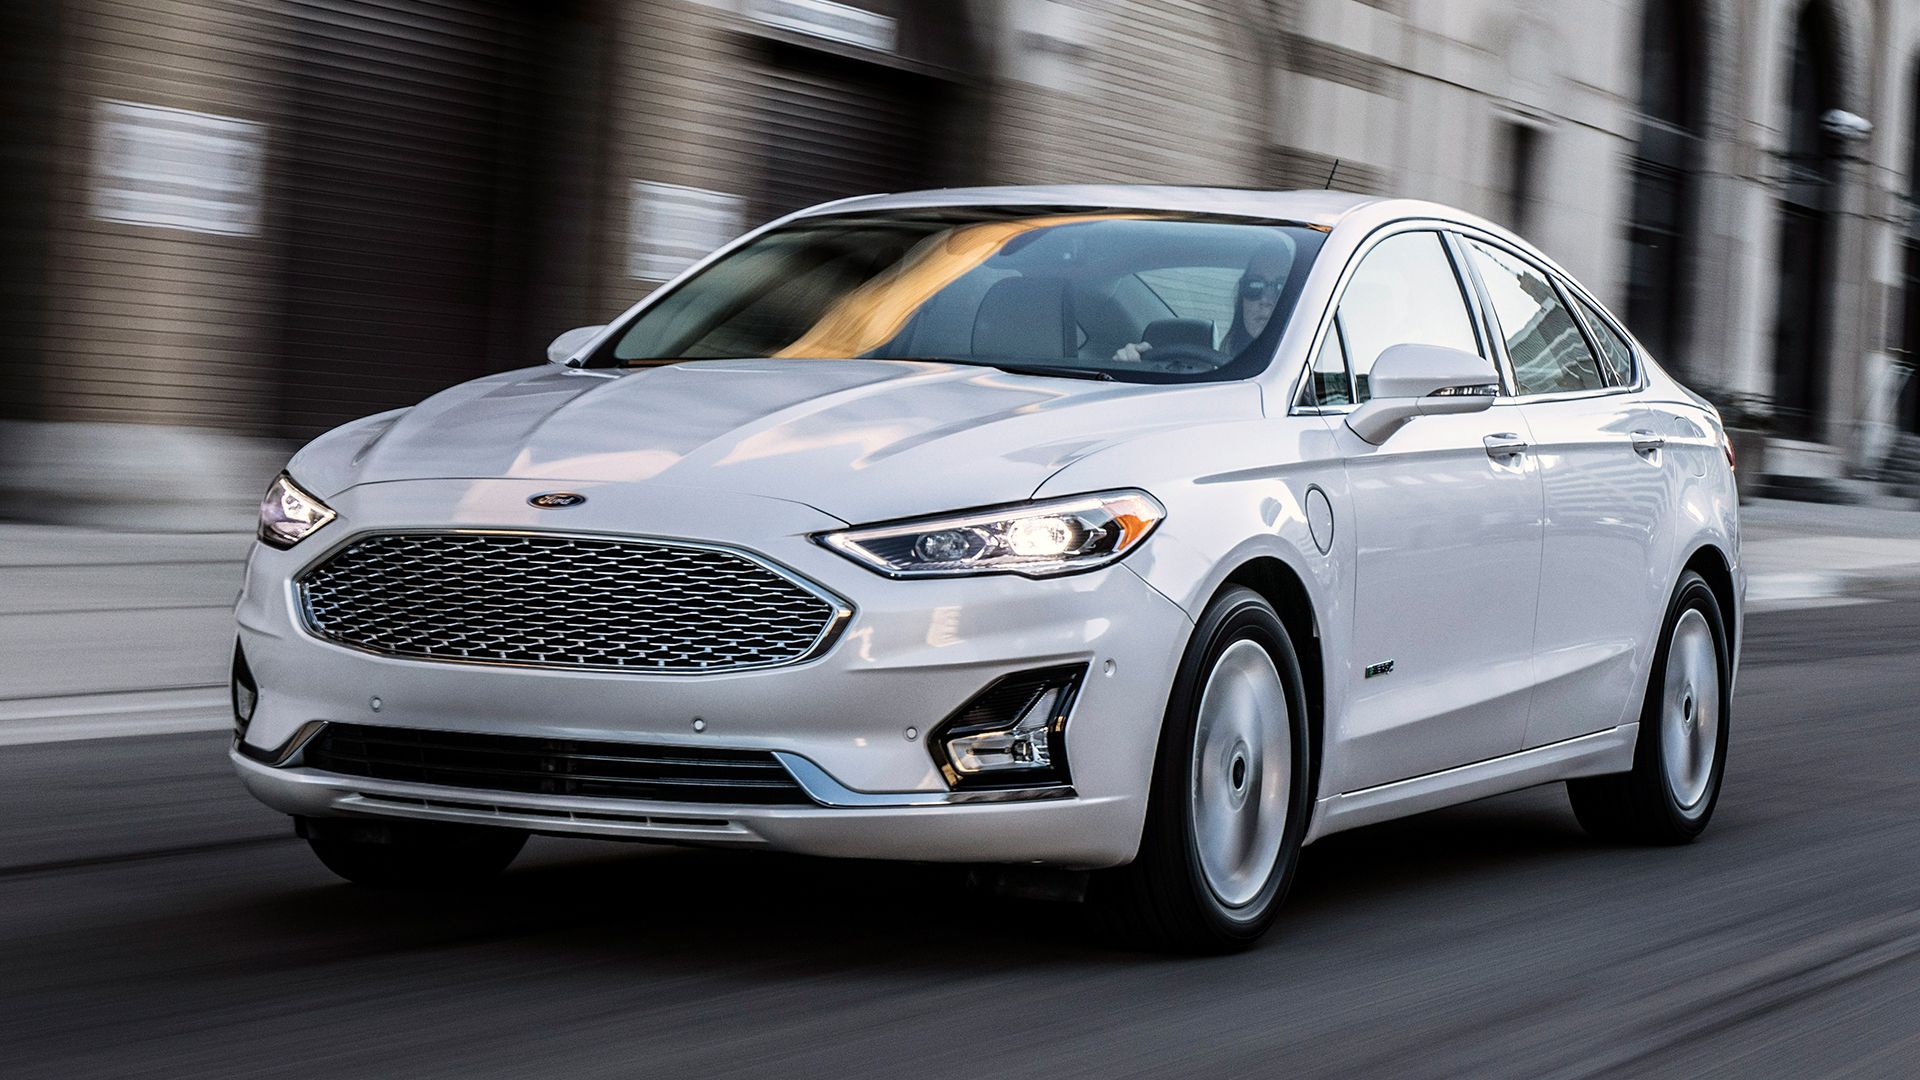 Exterior photo of the 2020 Ford Fusion